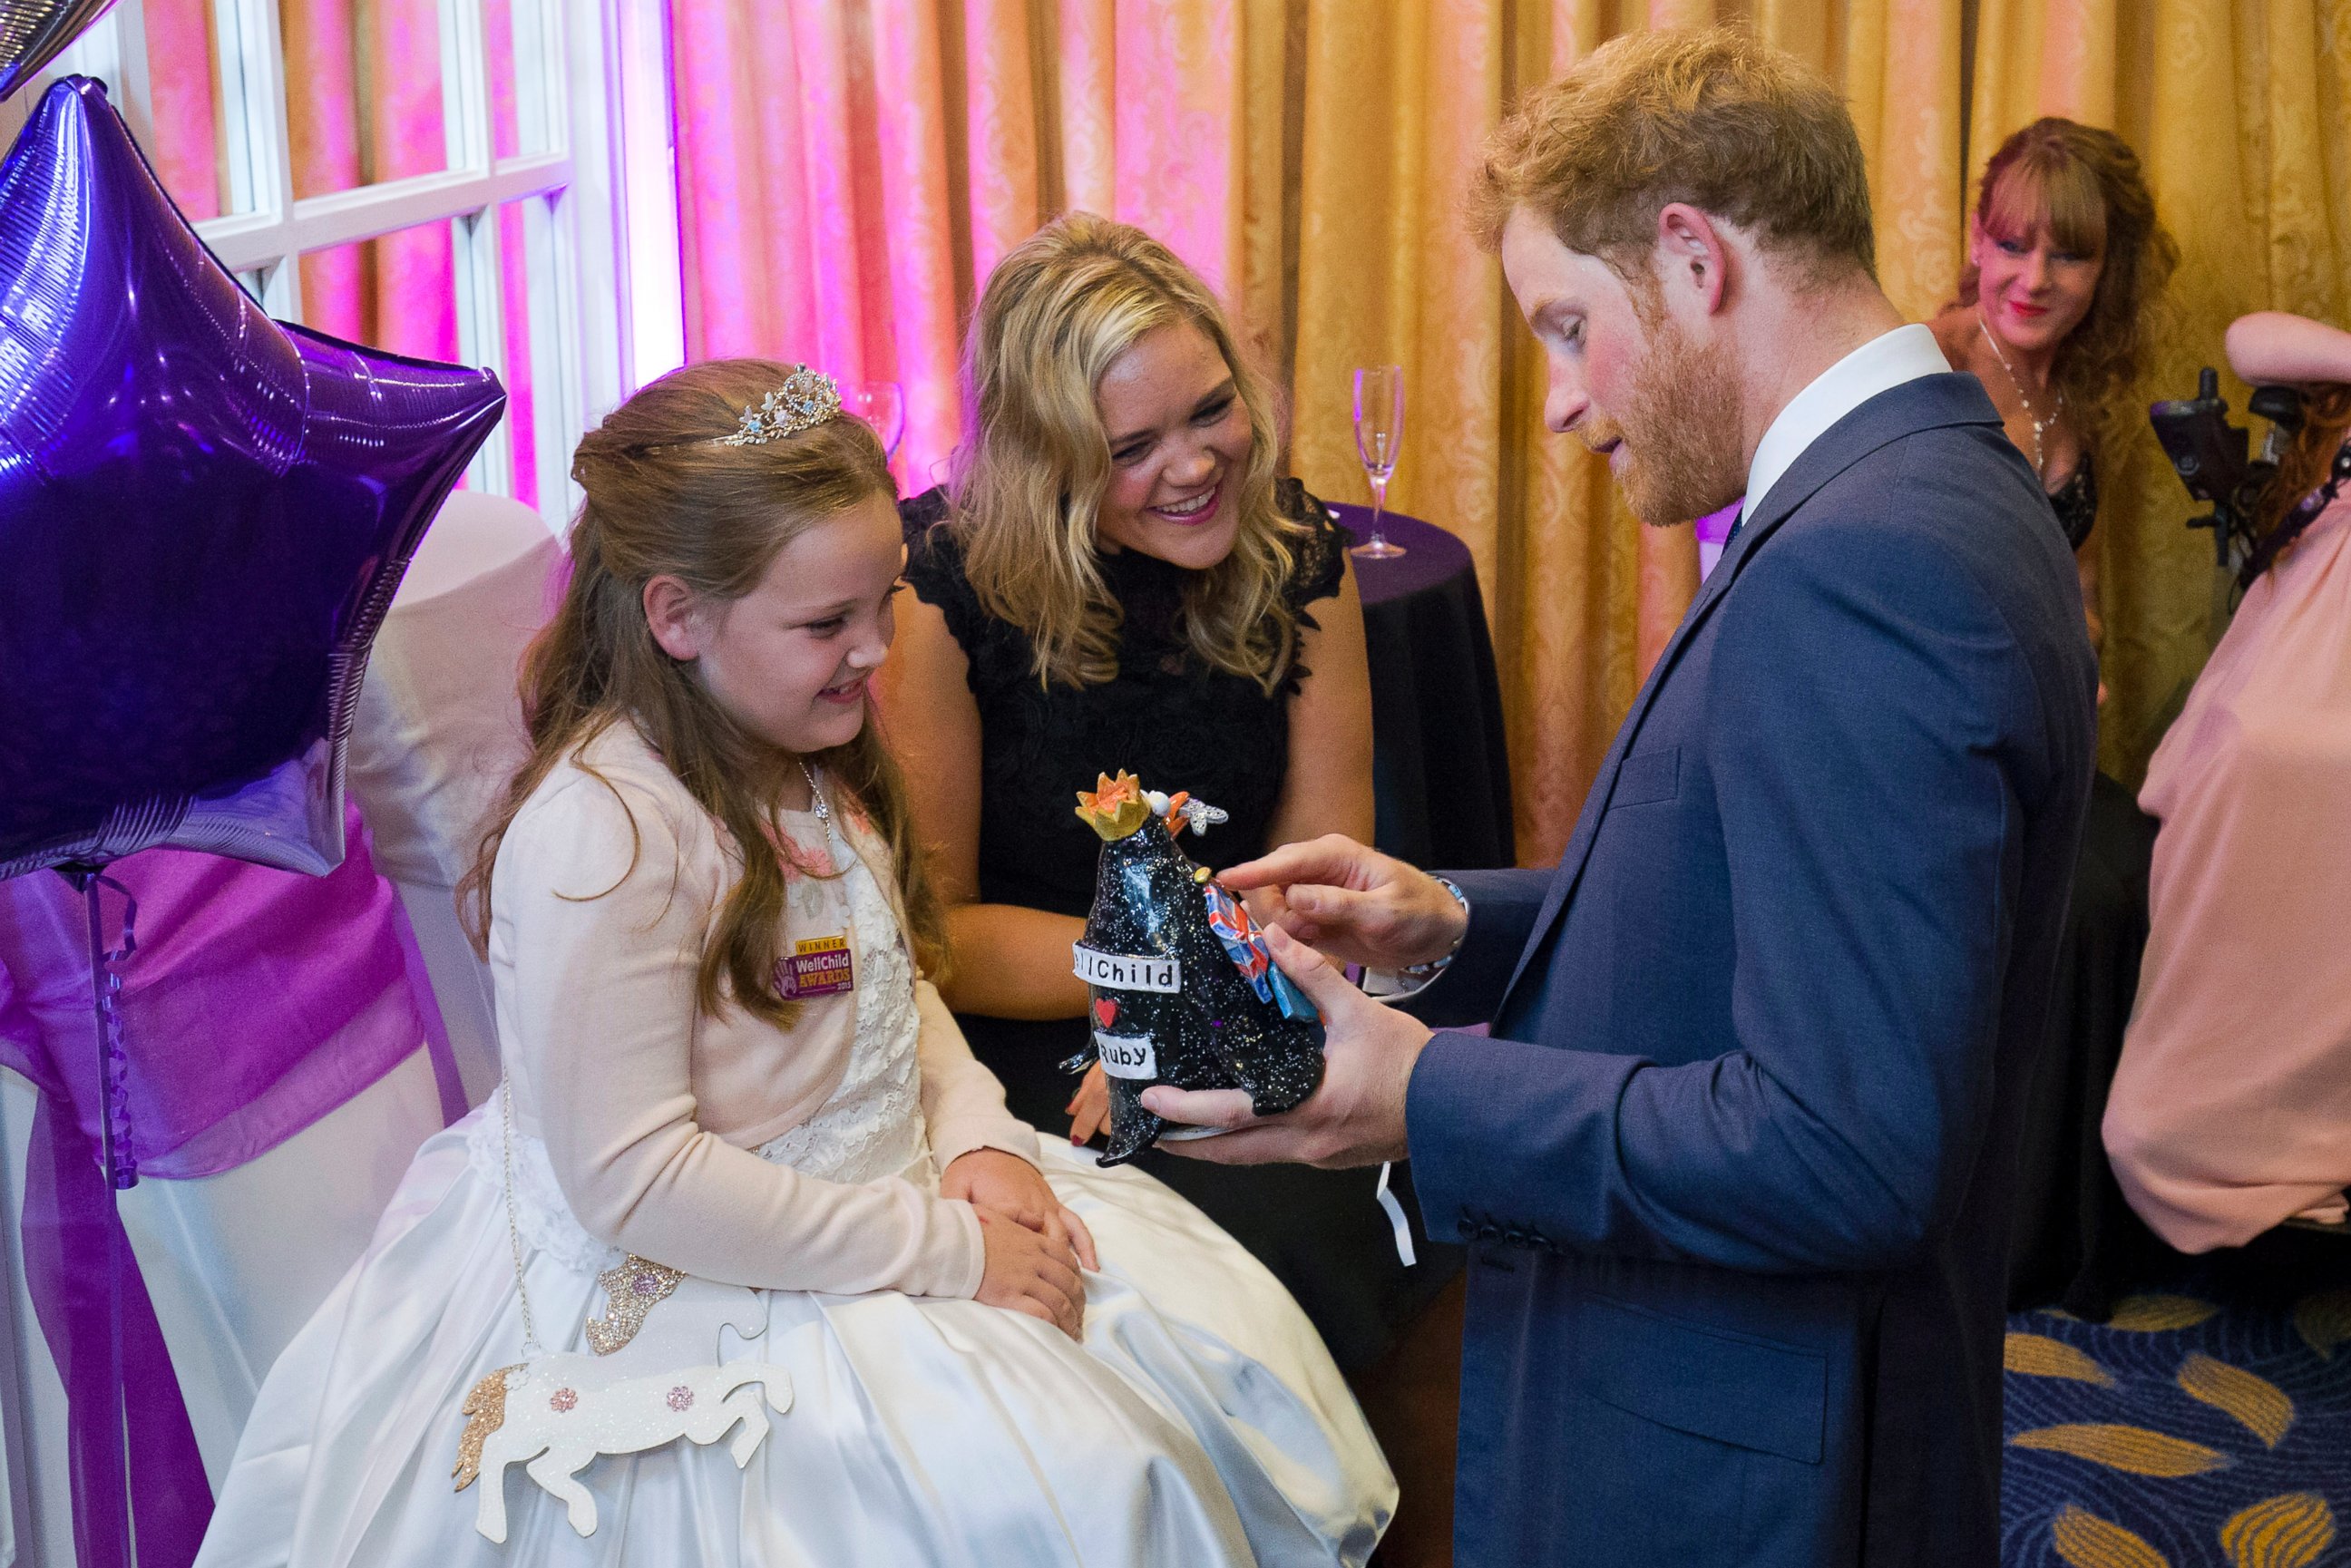 PHOTO: Prince Harry receives a gift from Ruby Smallman, 7, during an event for seriously ill children at the London Hilton, Oct. 5, 2015 in London, England.